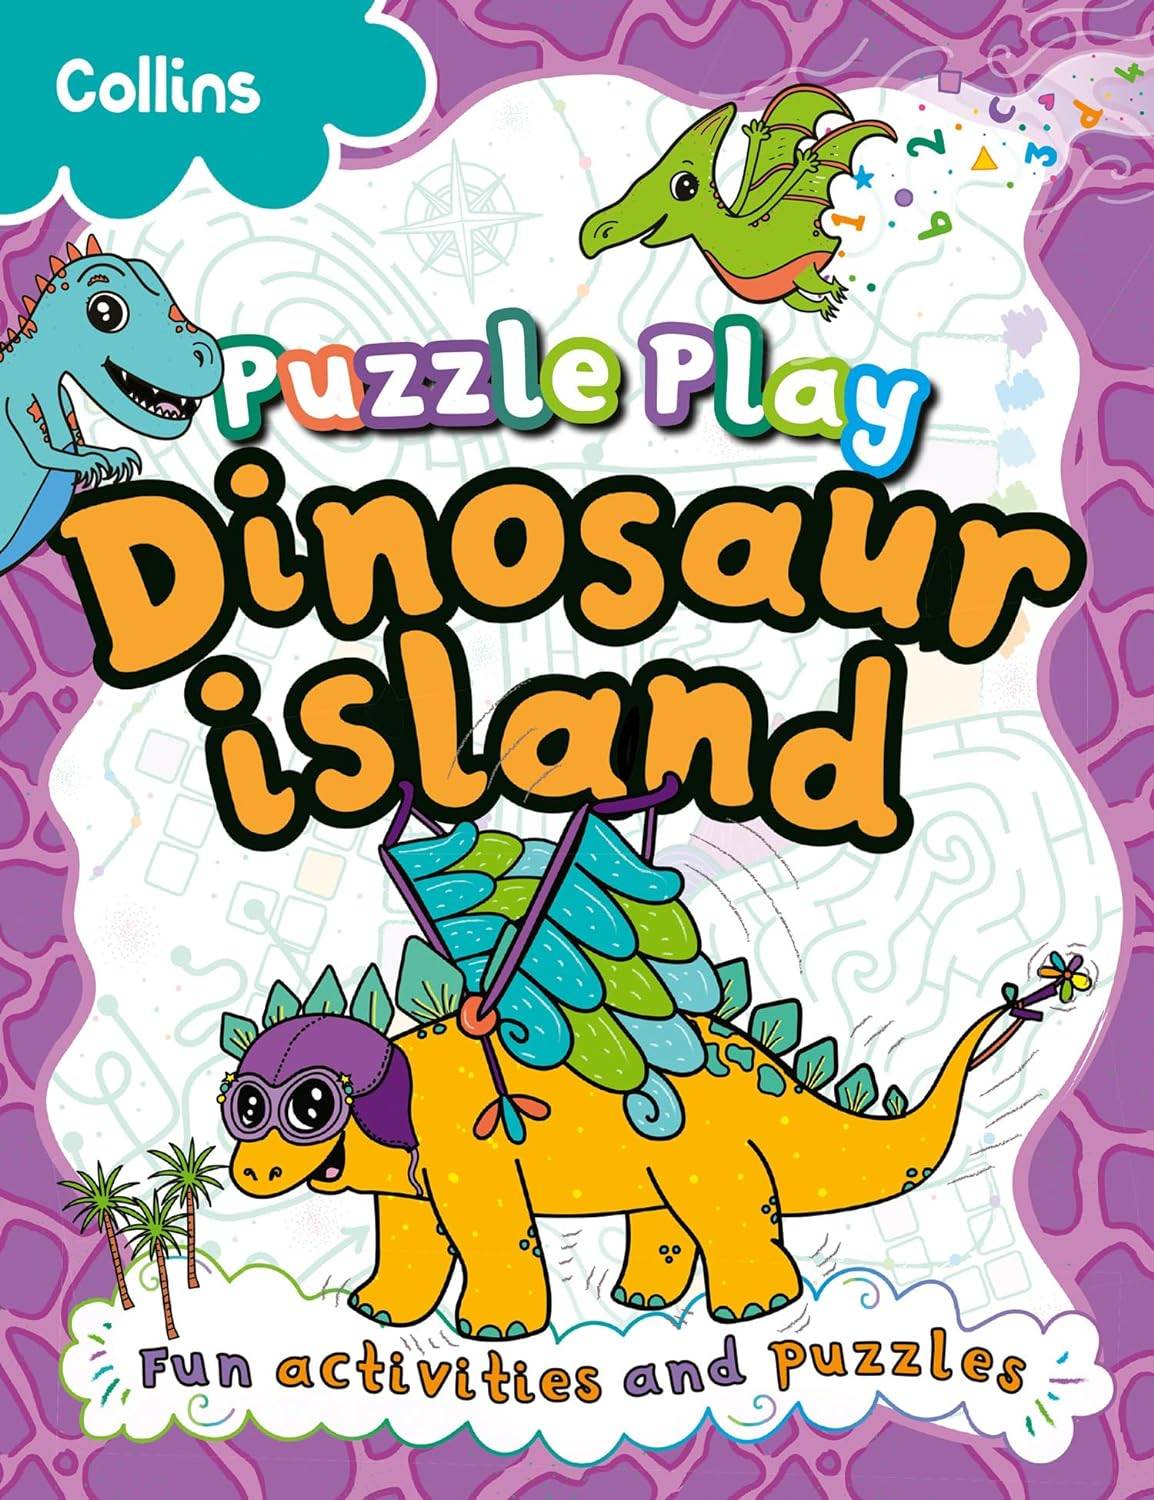 Puzzle Play Dinosaur Island (Puzzle Pals) by Kia Marie Hunt for Collins Kids - Dinosaur activity book for kids